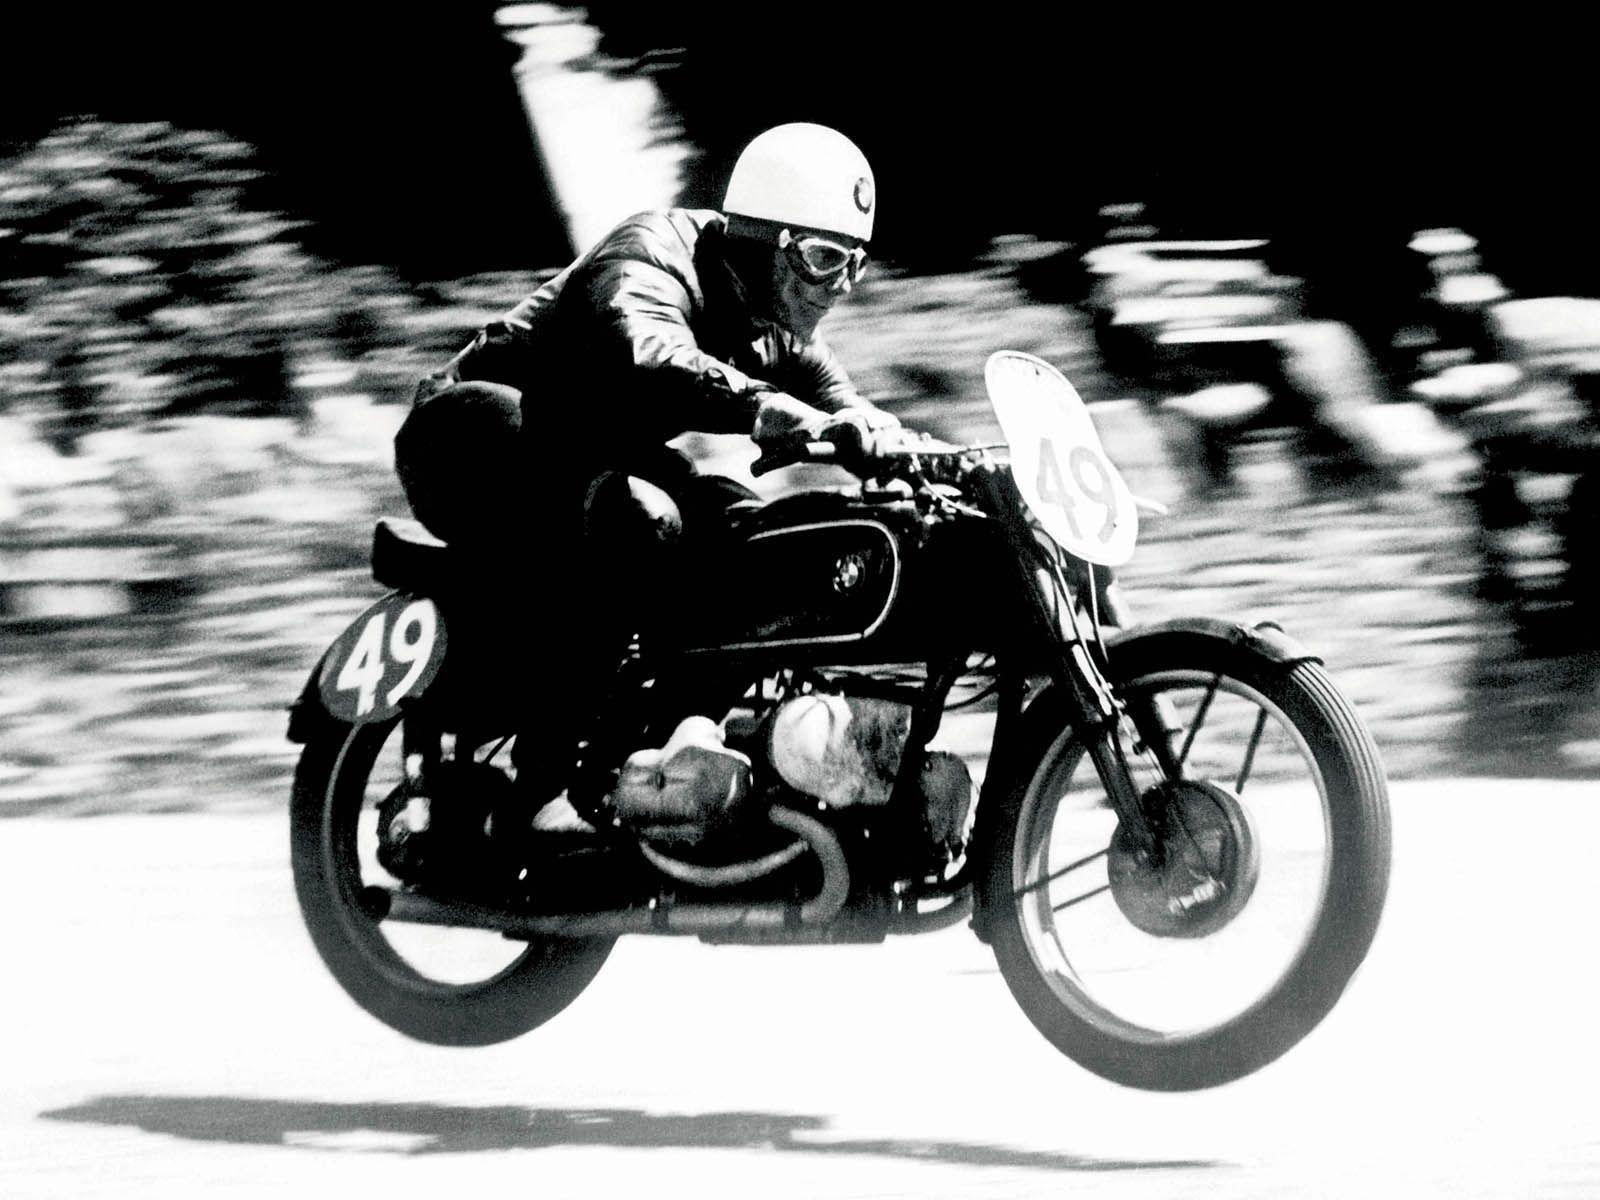 image For > Vintage Motorcycle Wallpaper